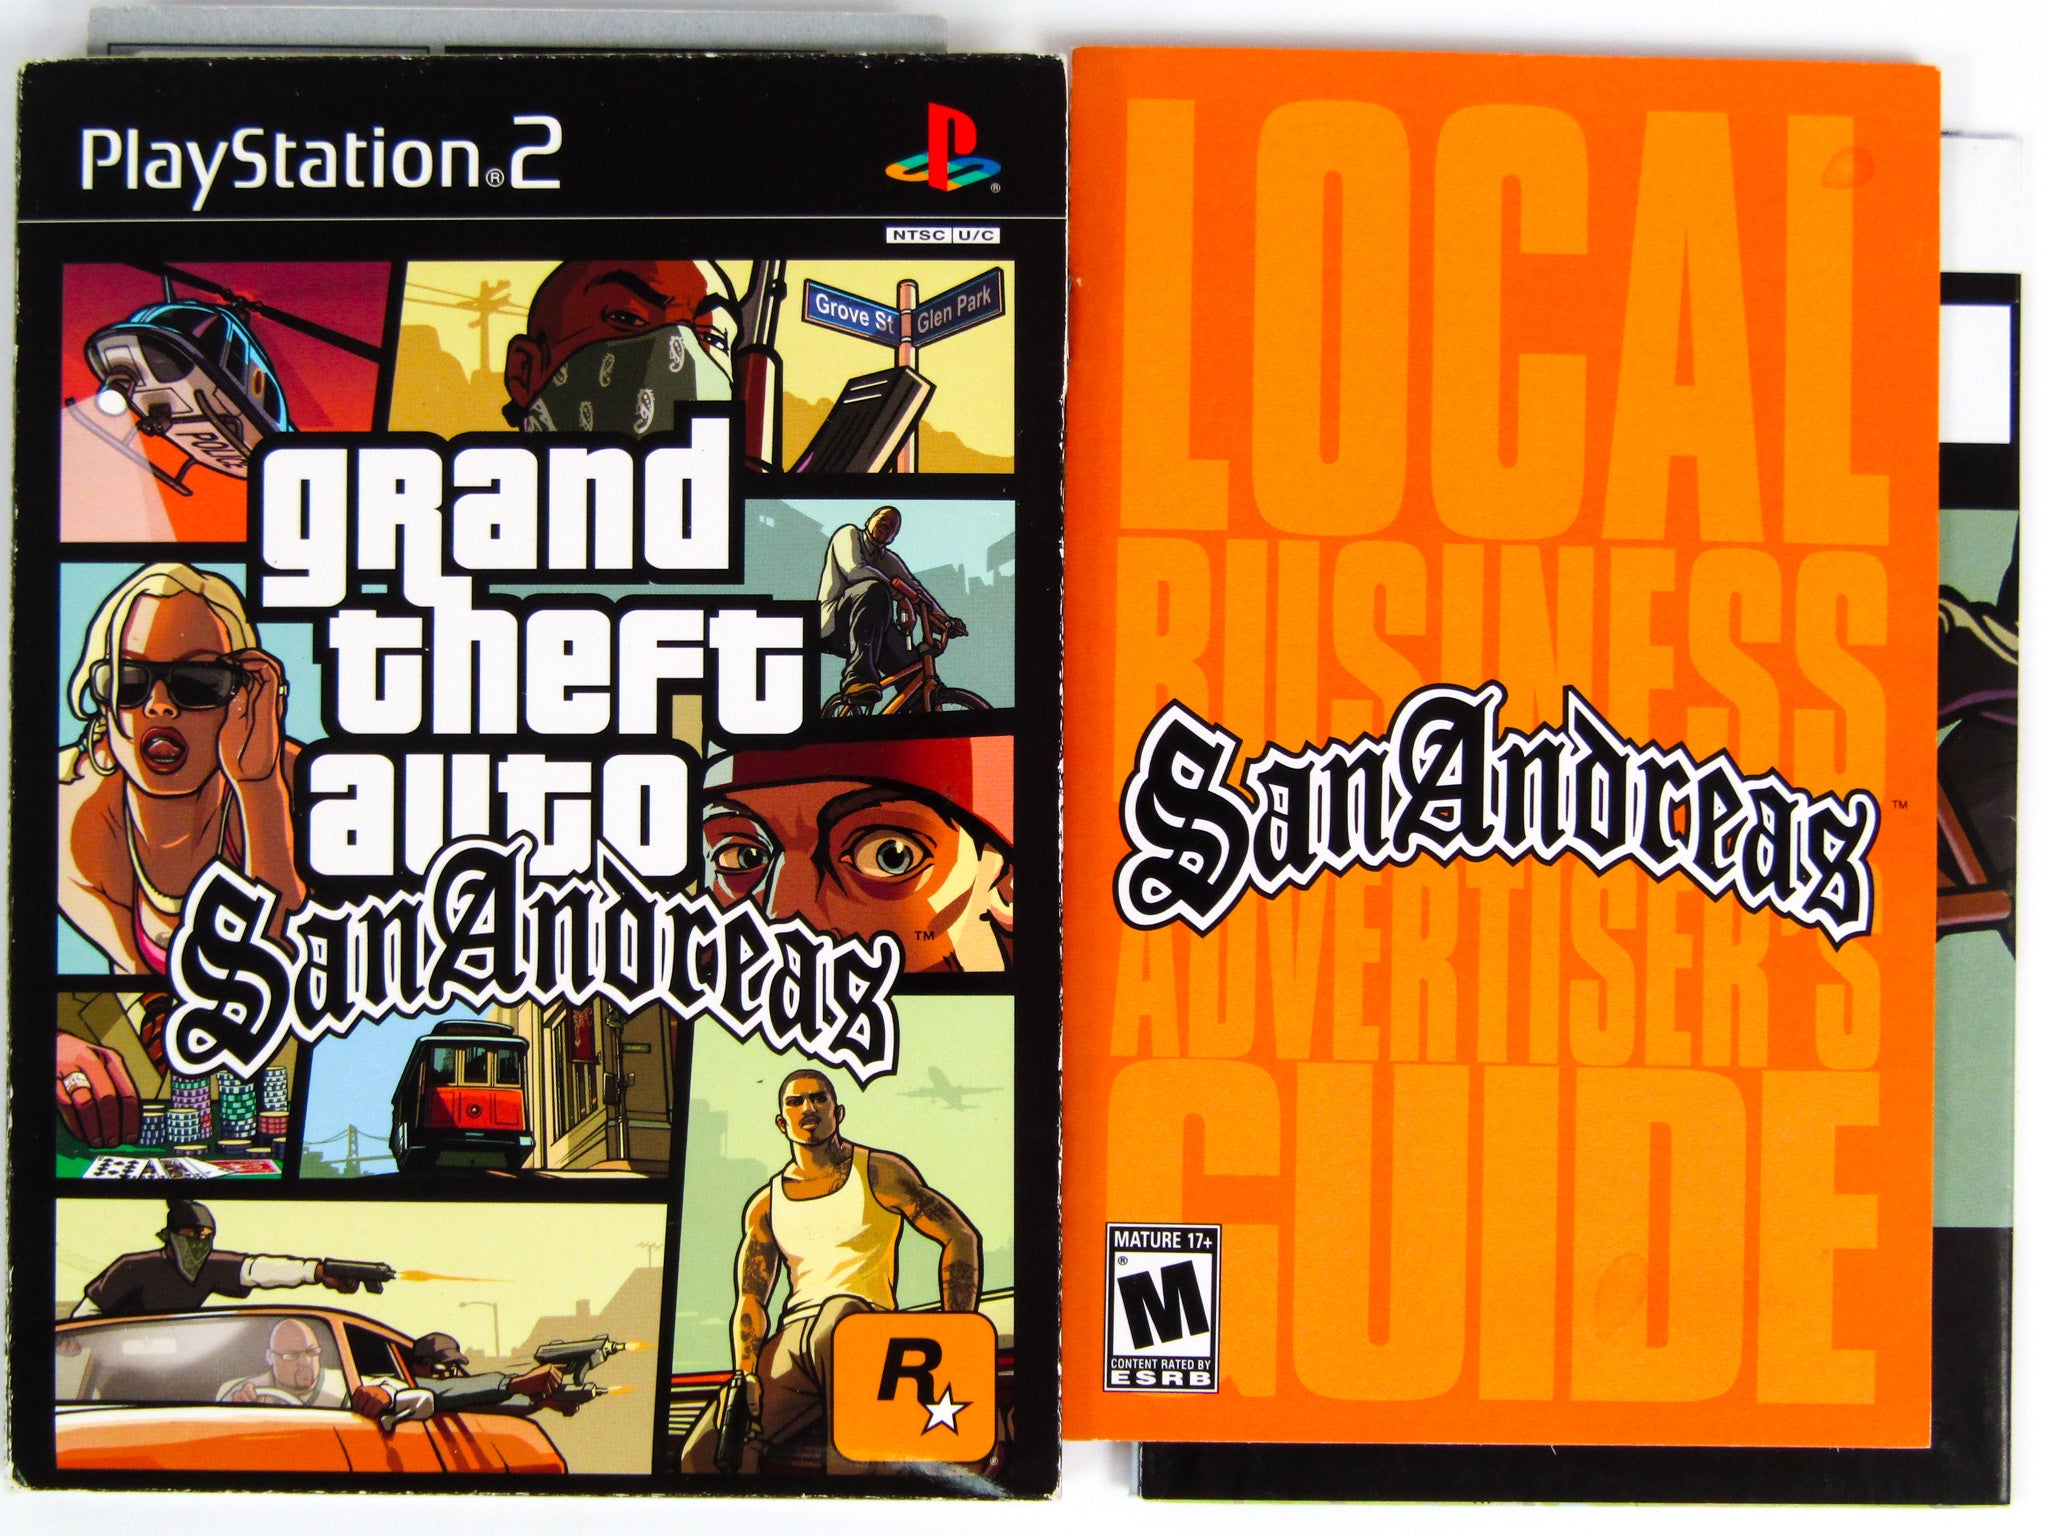 Grand Theft Auto: San Andreas manual for the Playstation 2